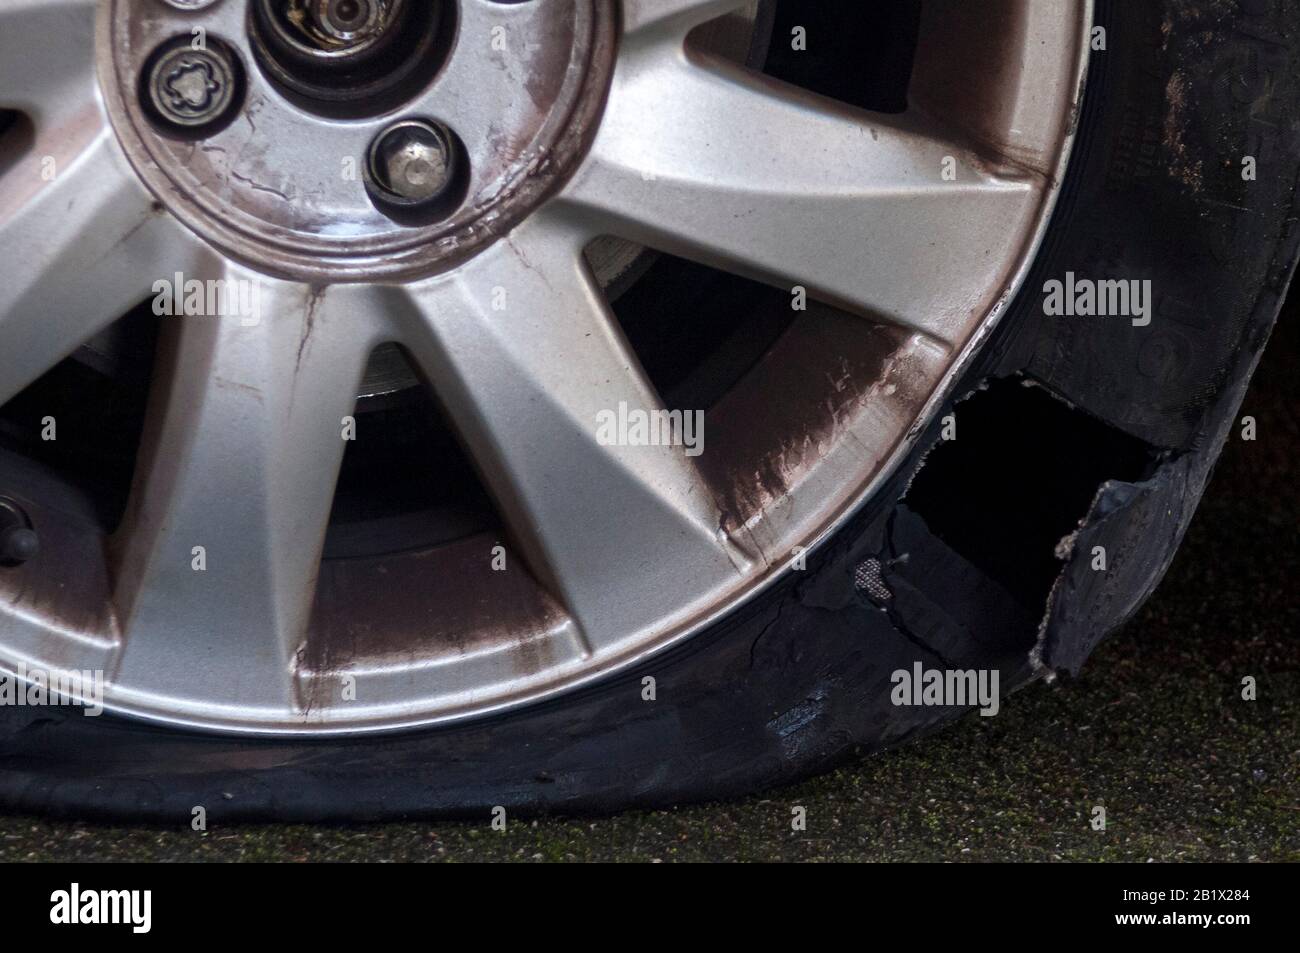 A large hole in the wall of a tyre after a blowout.  The rim of the alloy wheel is also damaged. Stock Photo